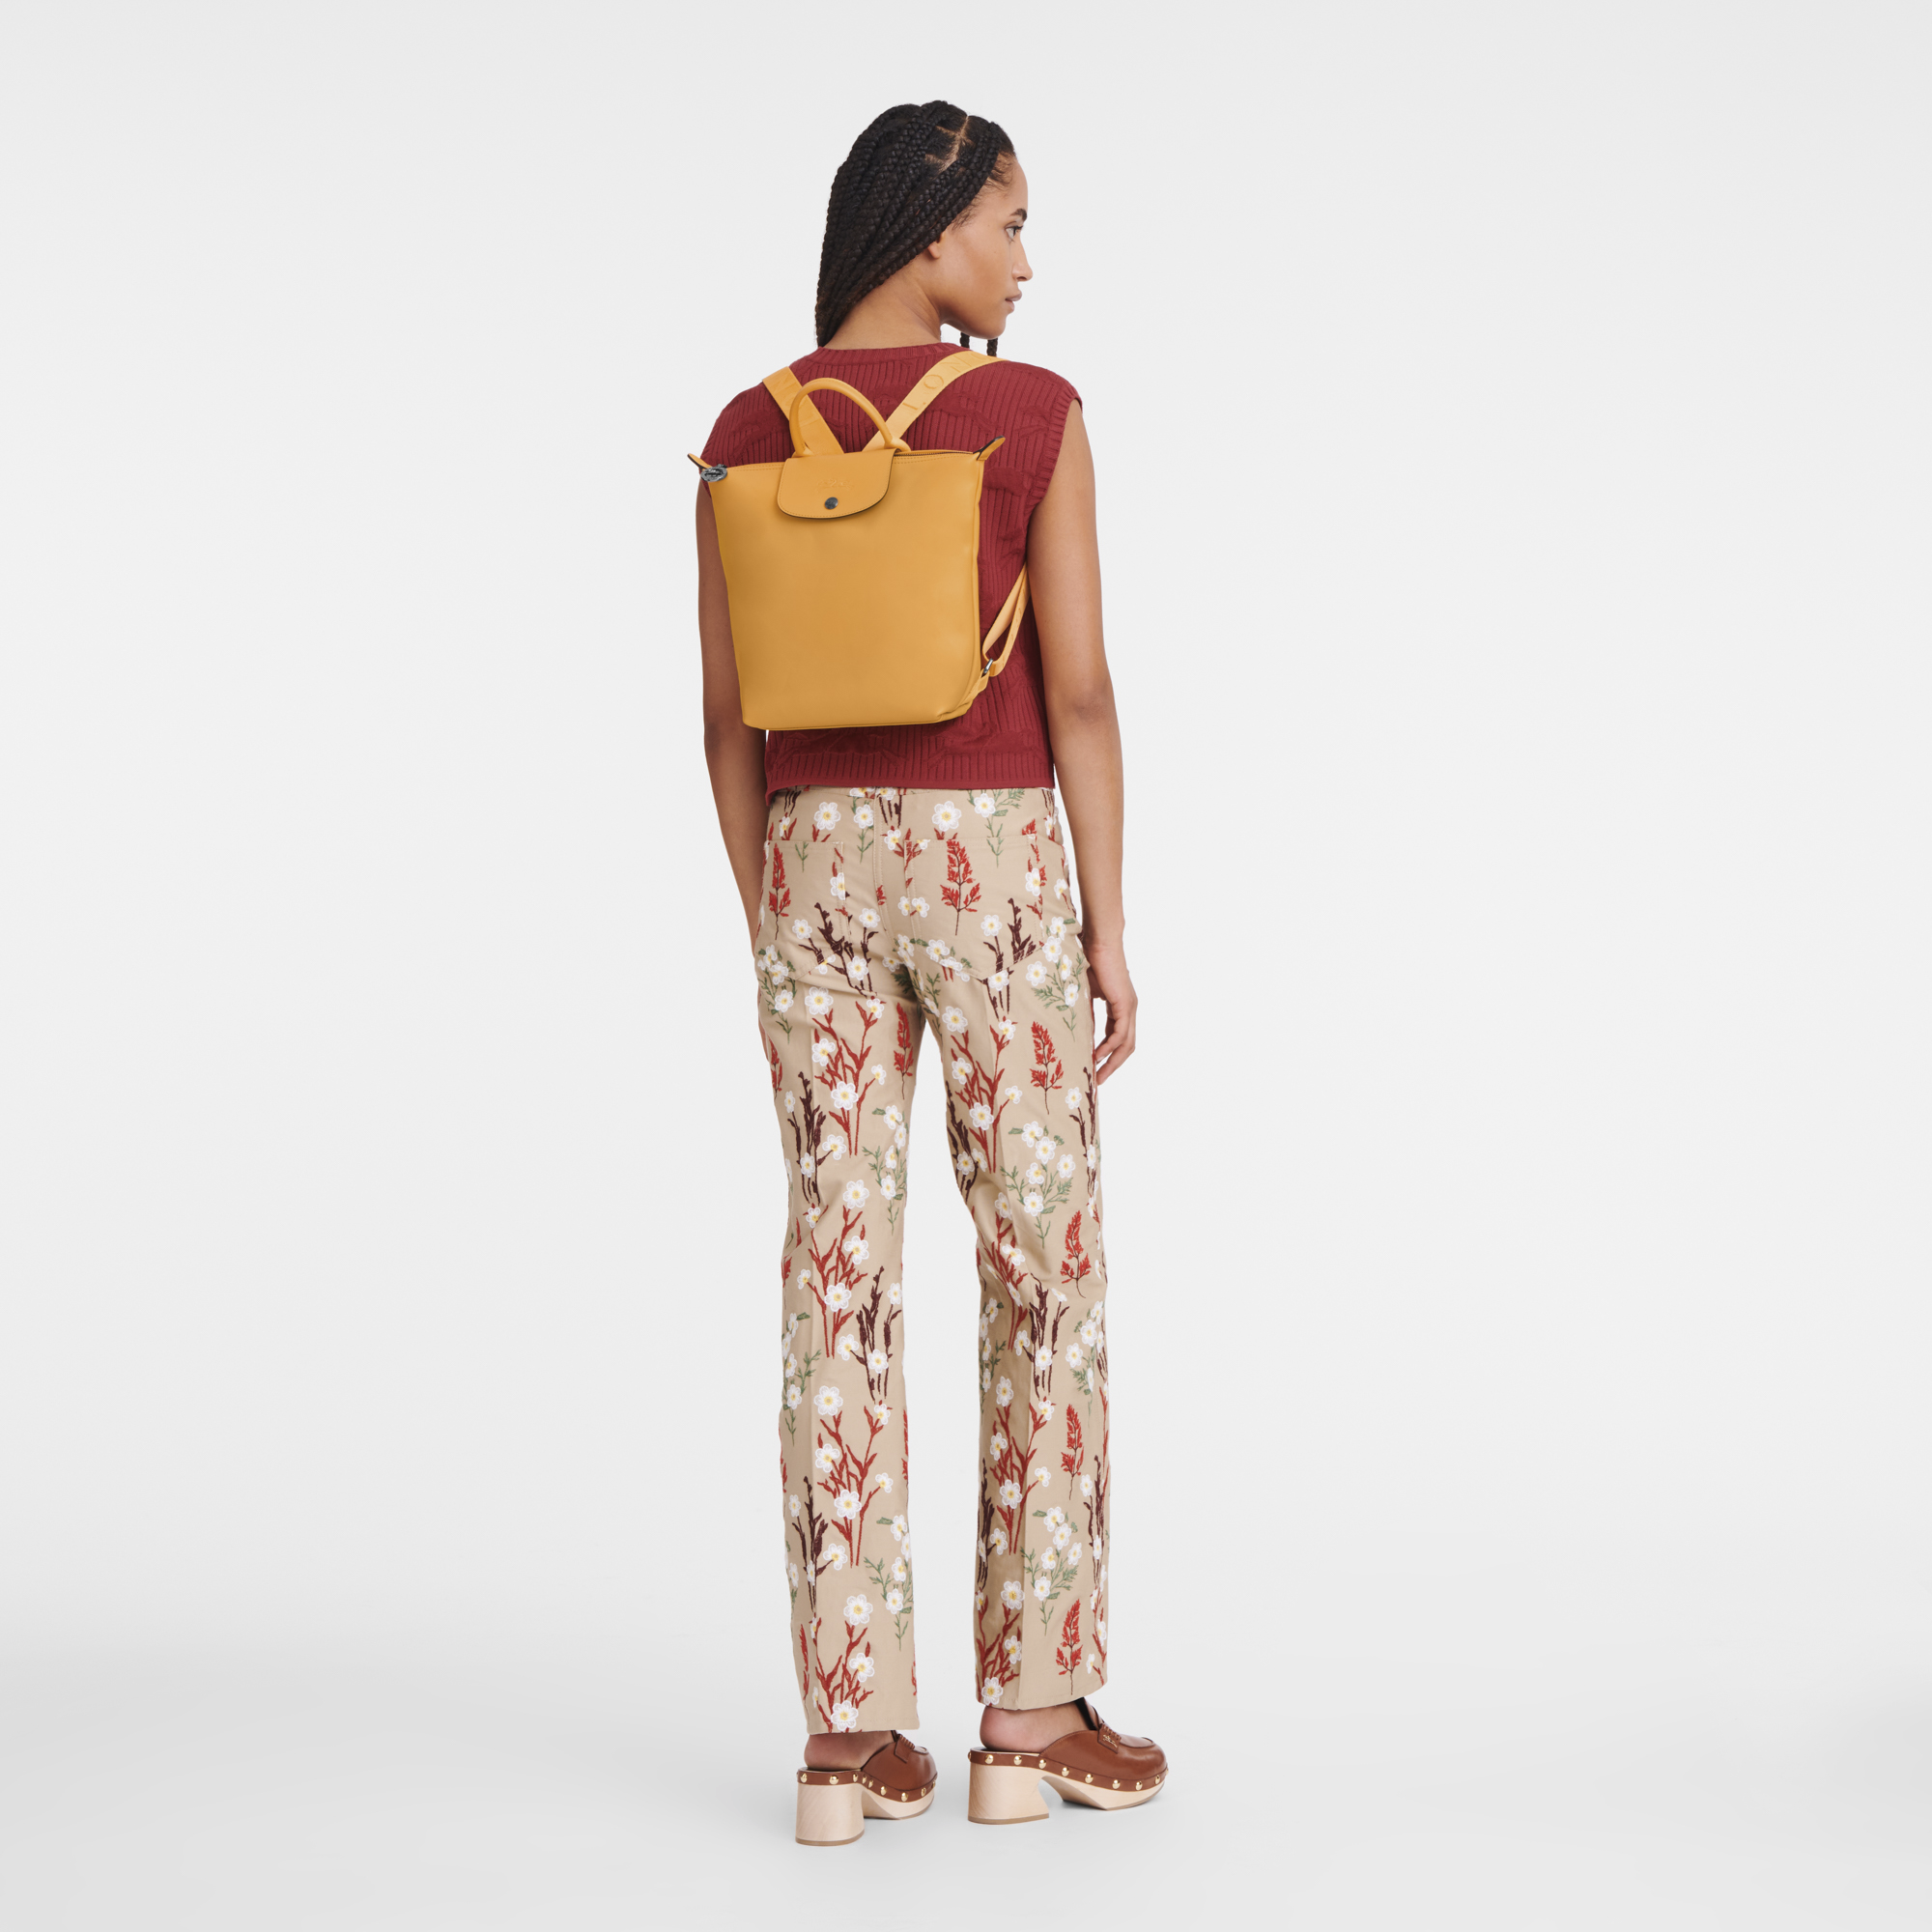 Le Pliage Xtra Backpack S, Apricot